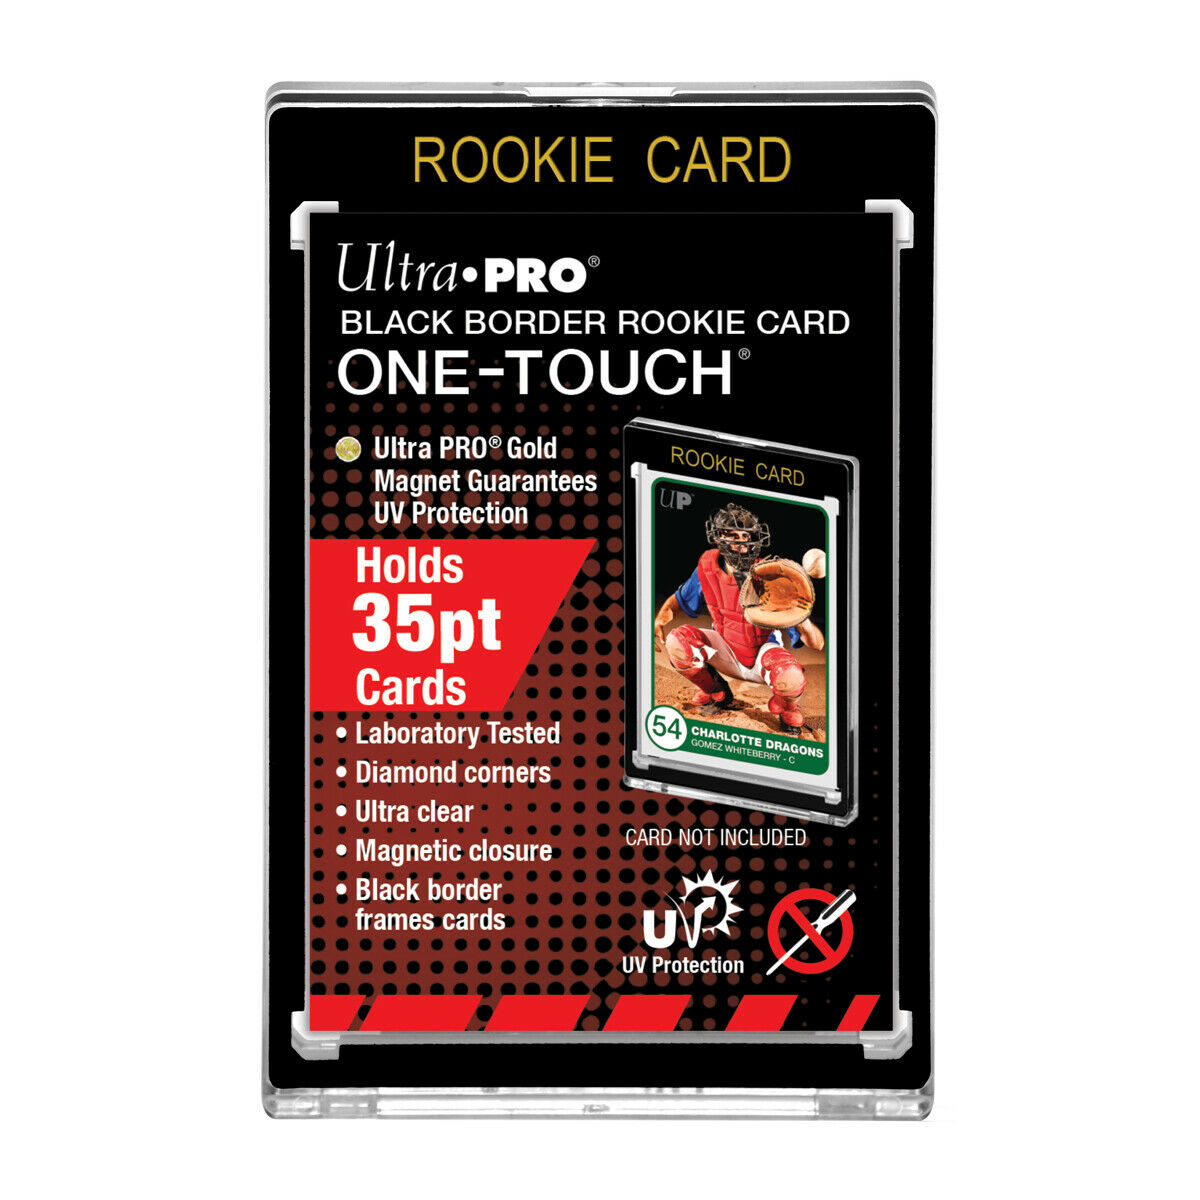 Ultra Pro One-Touch Rookie Card Holder - Black Border